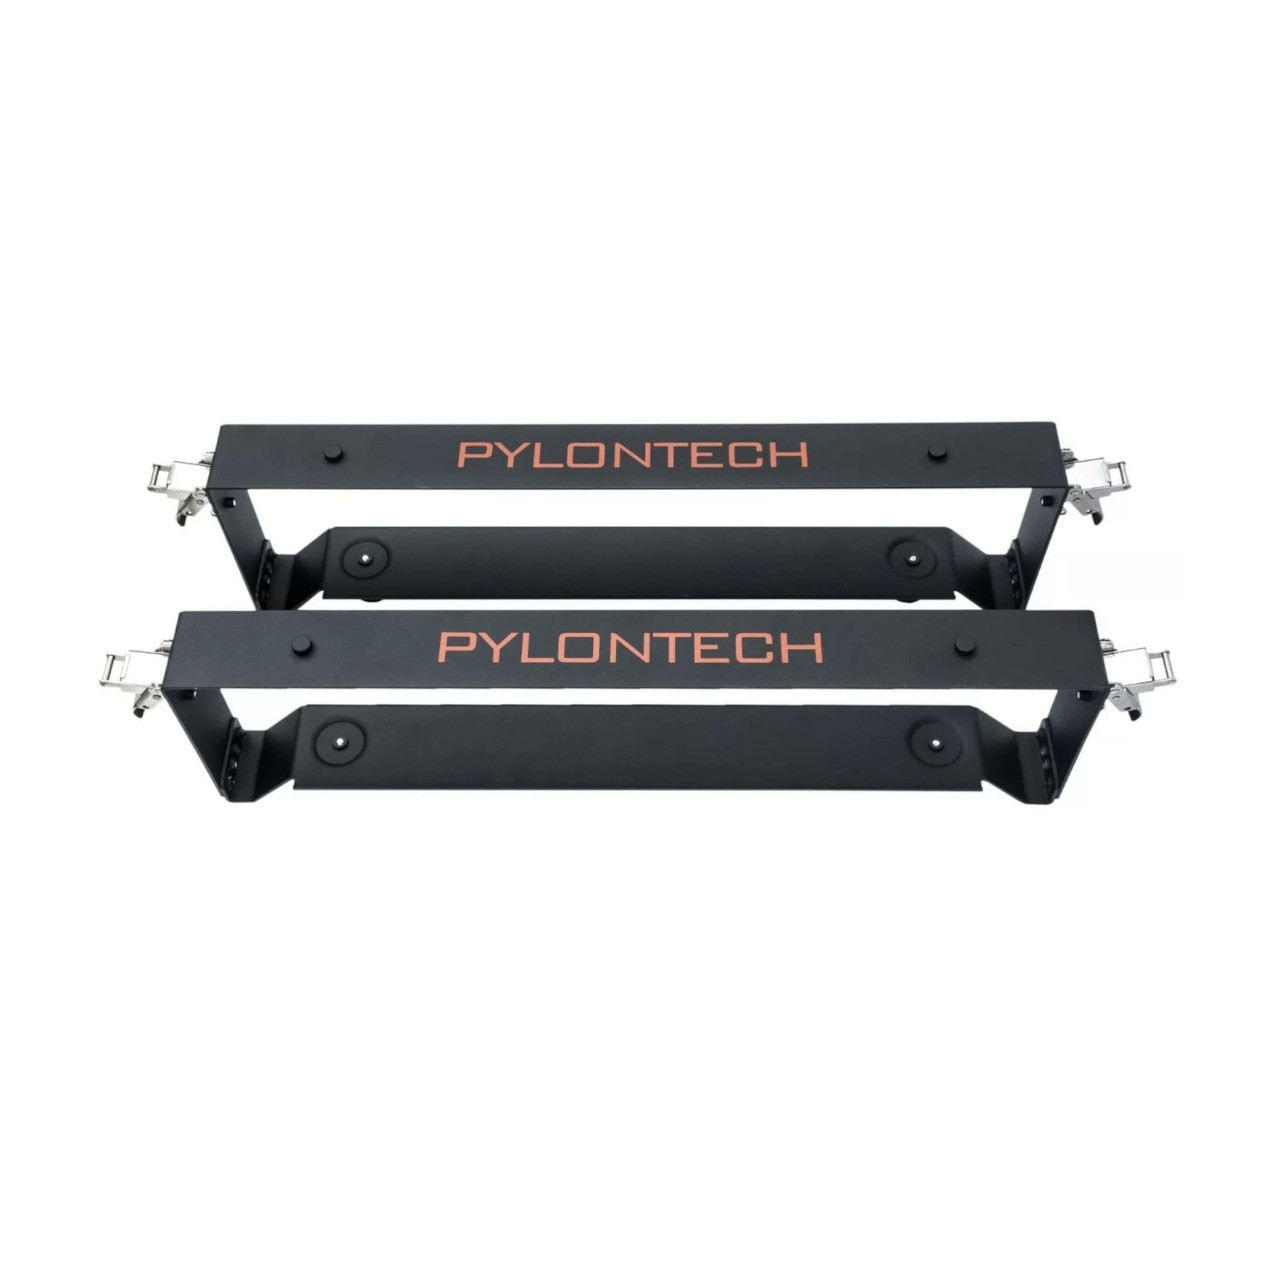 Pylontech - Stacking Clips/Brackets - Front